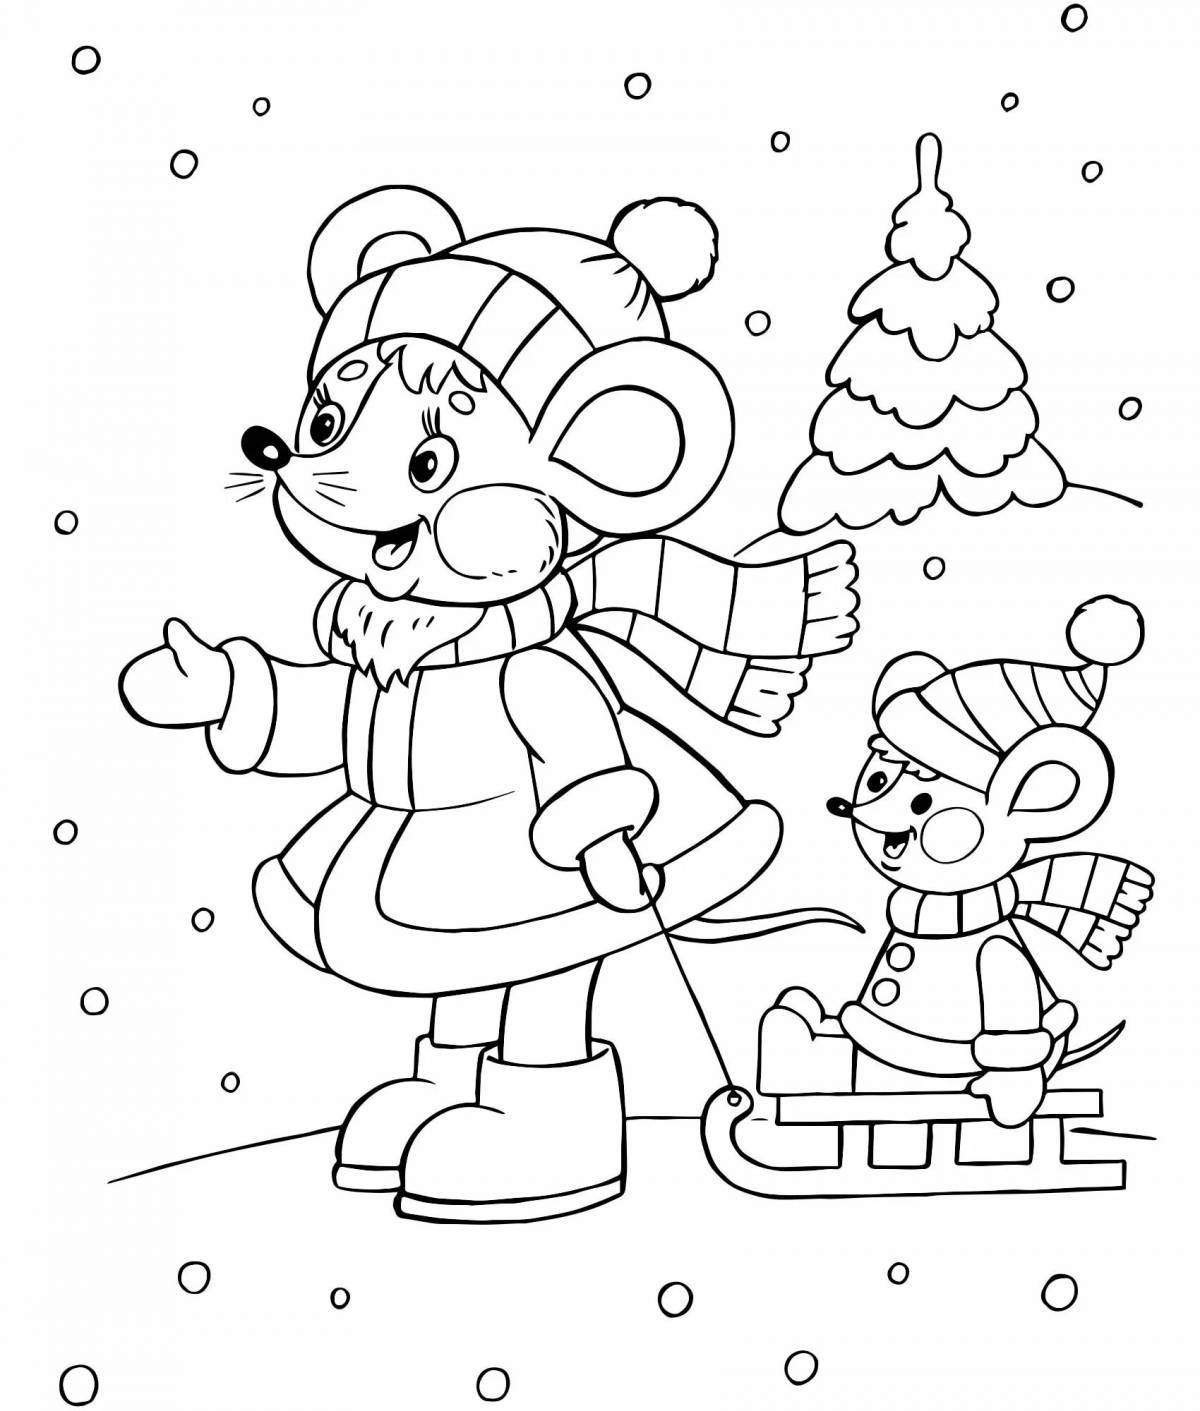 Fabulous winter coloring for kids